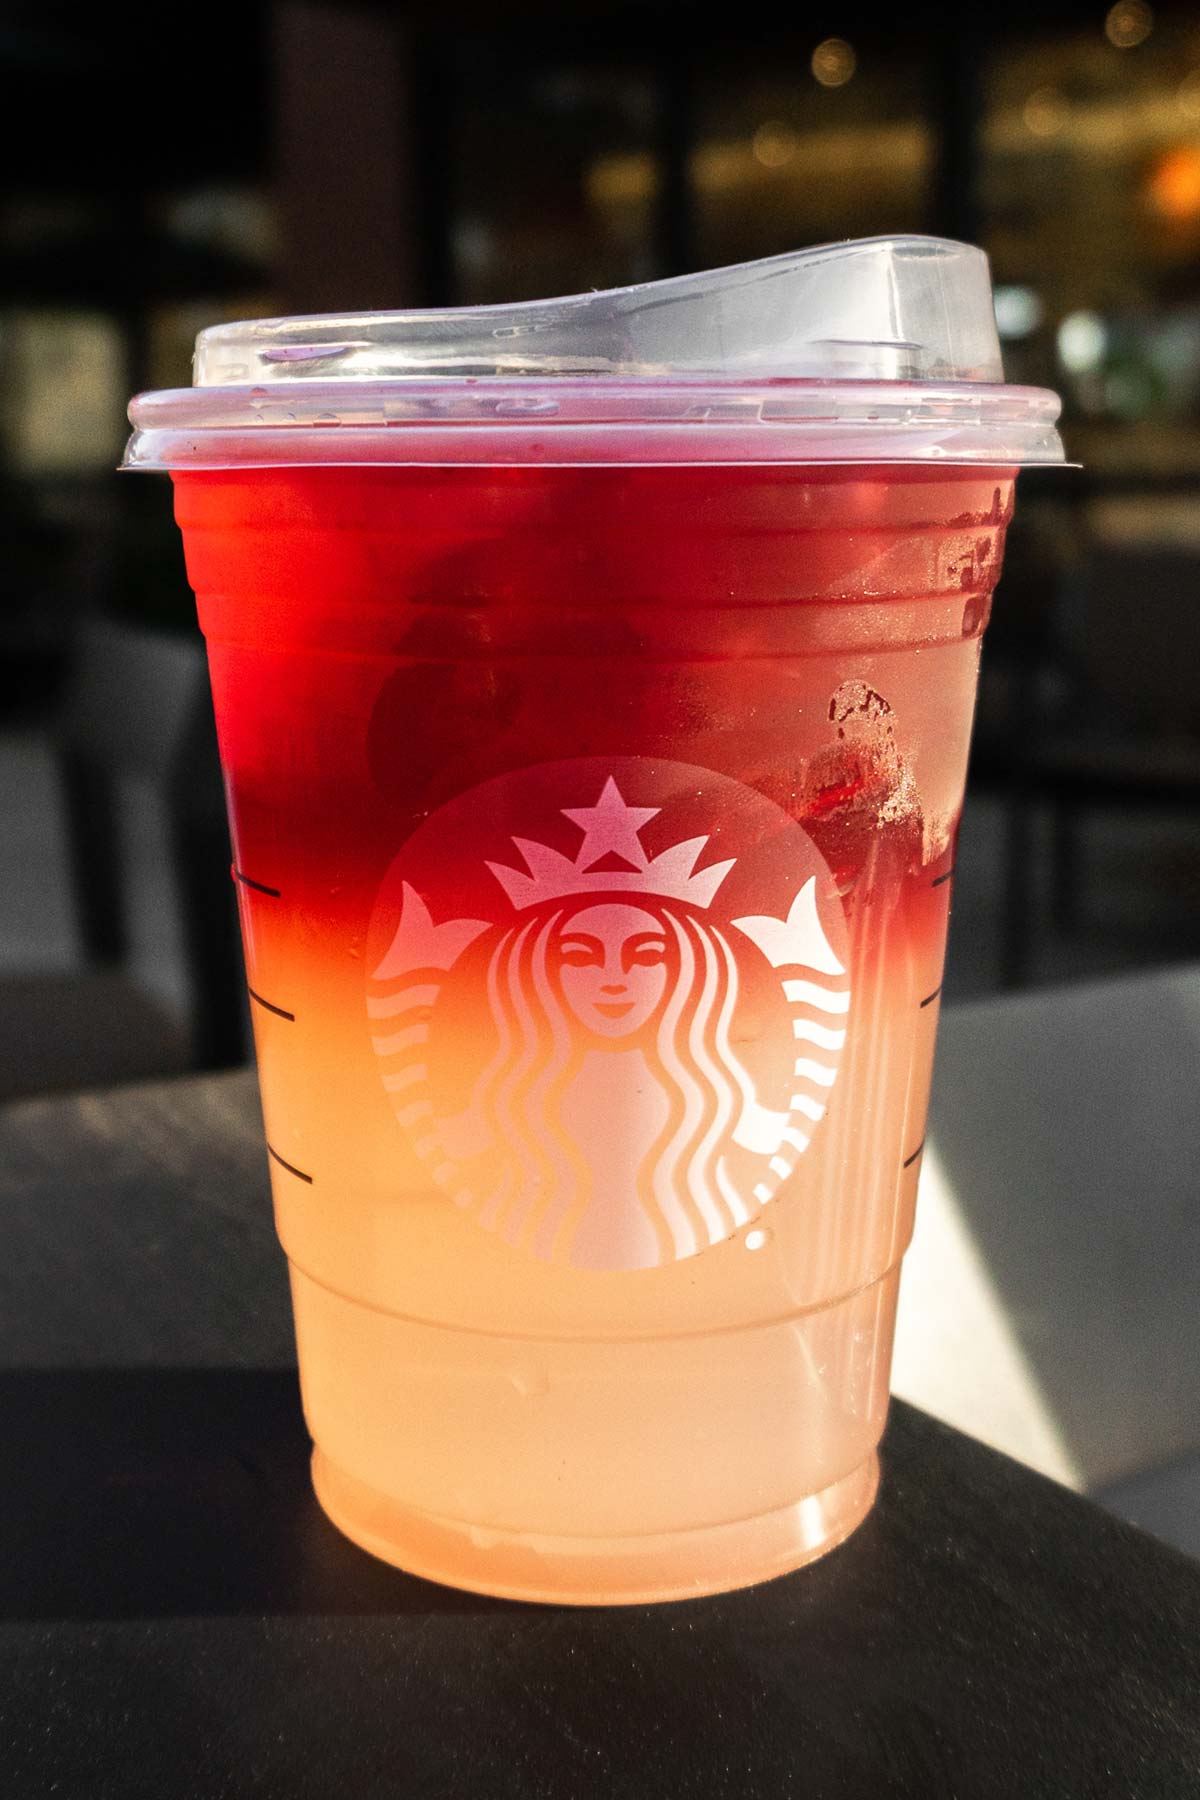 Grande sized Starbucks ombre drink in a cup with a lid.